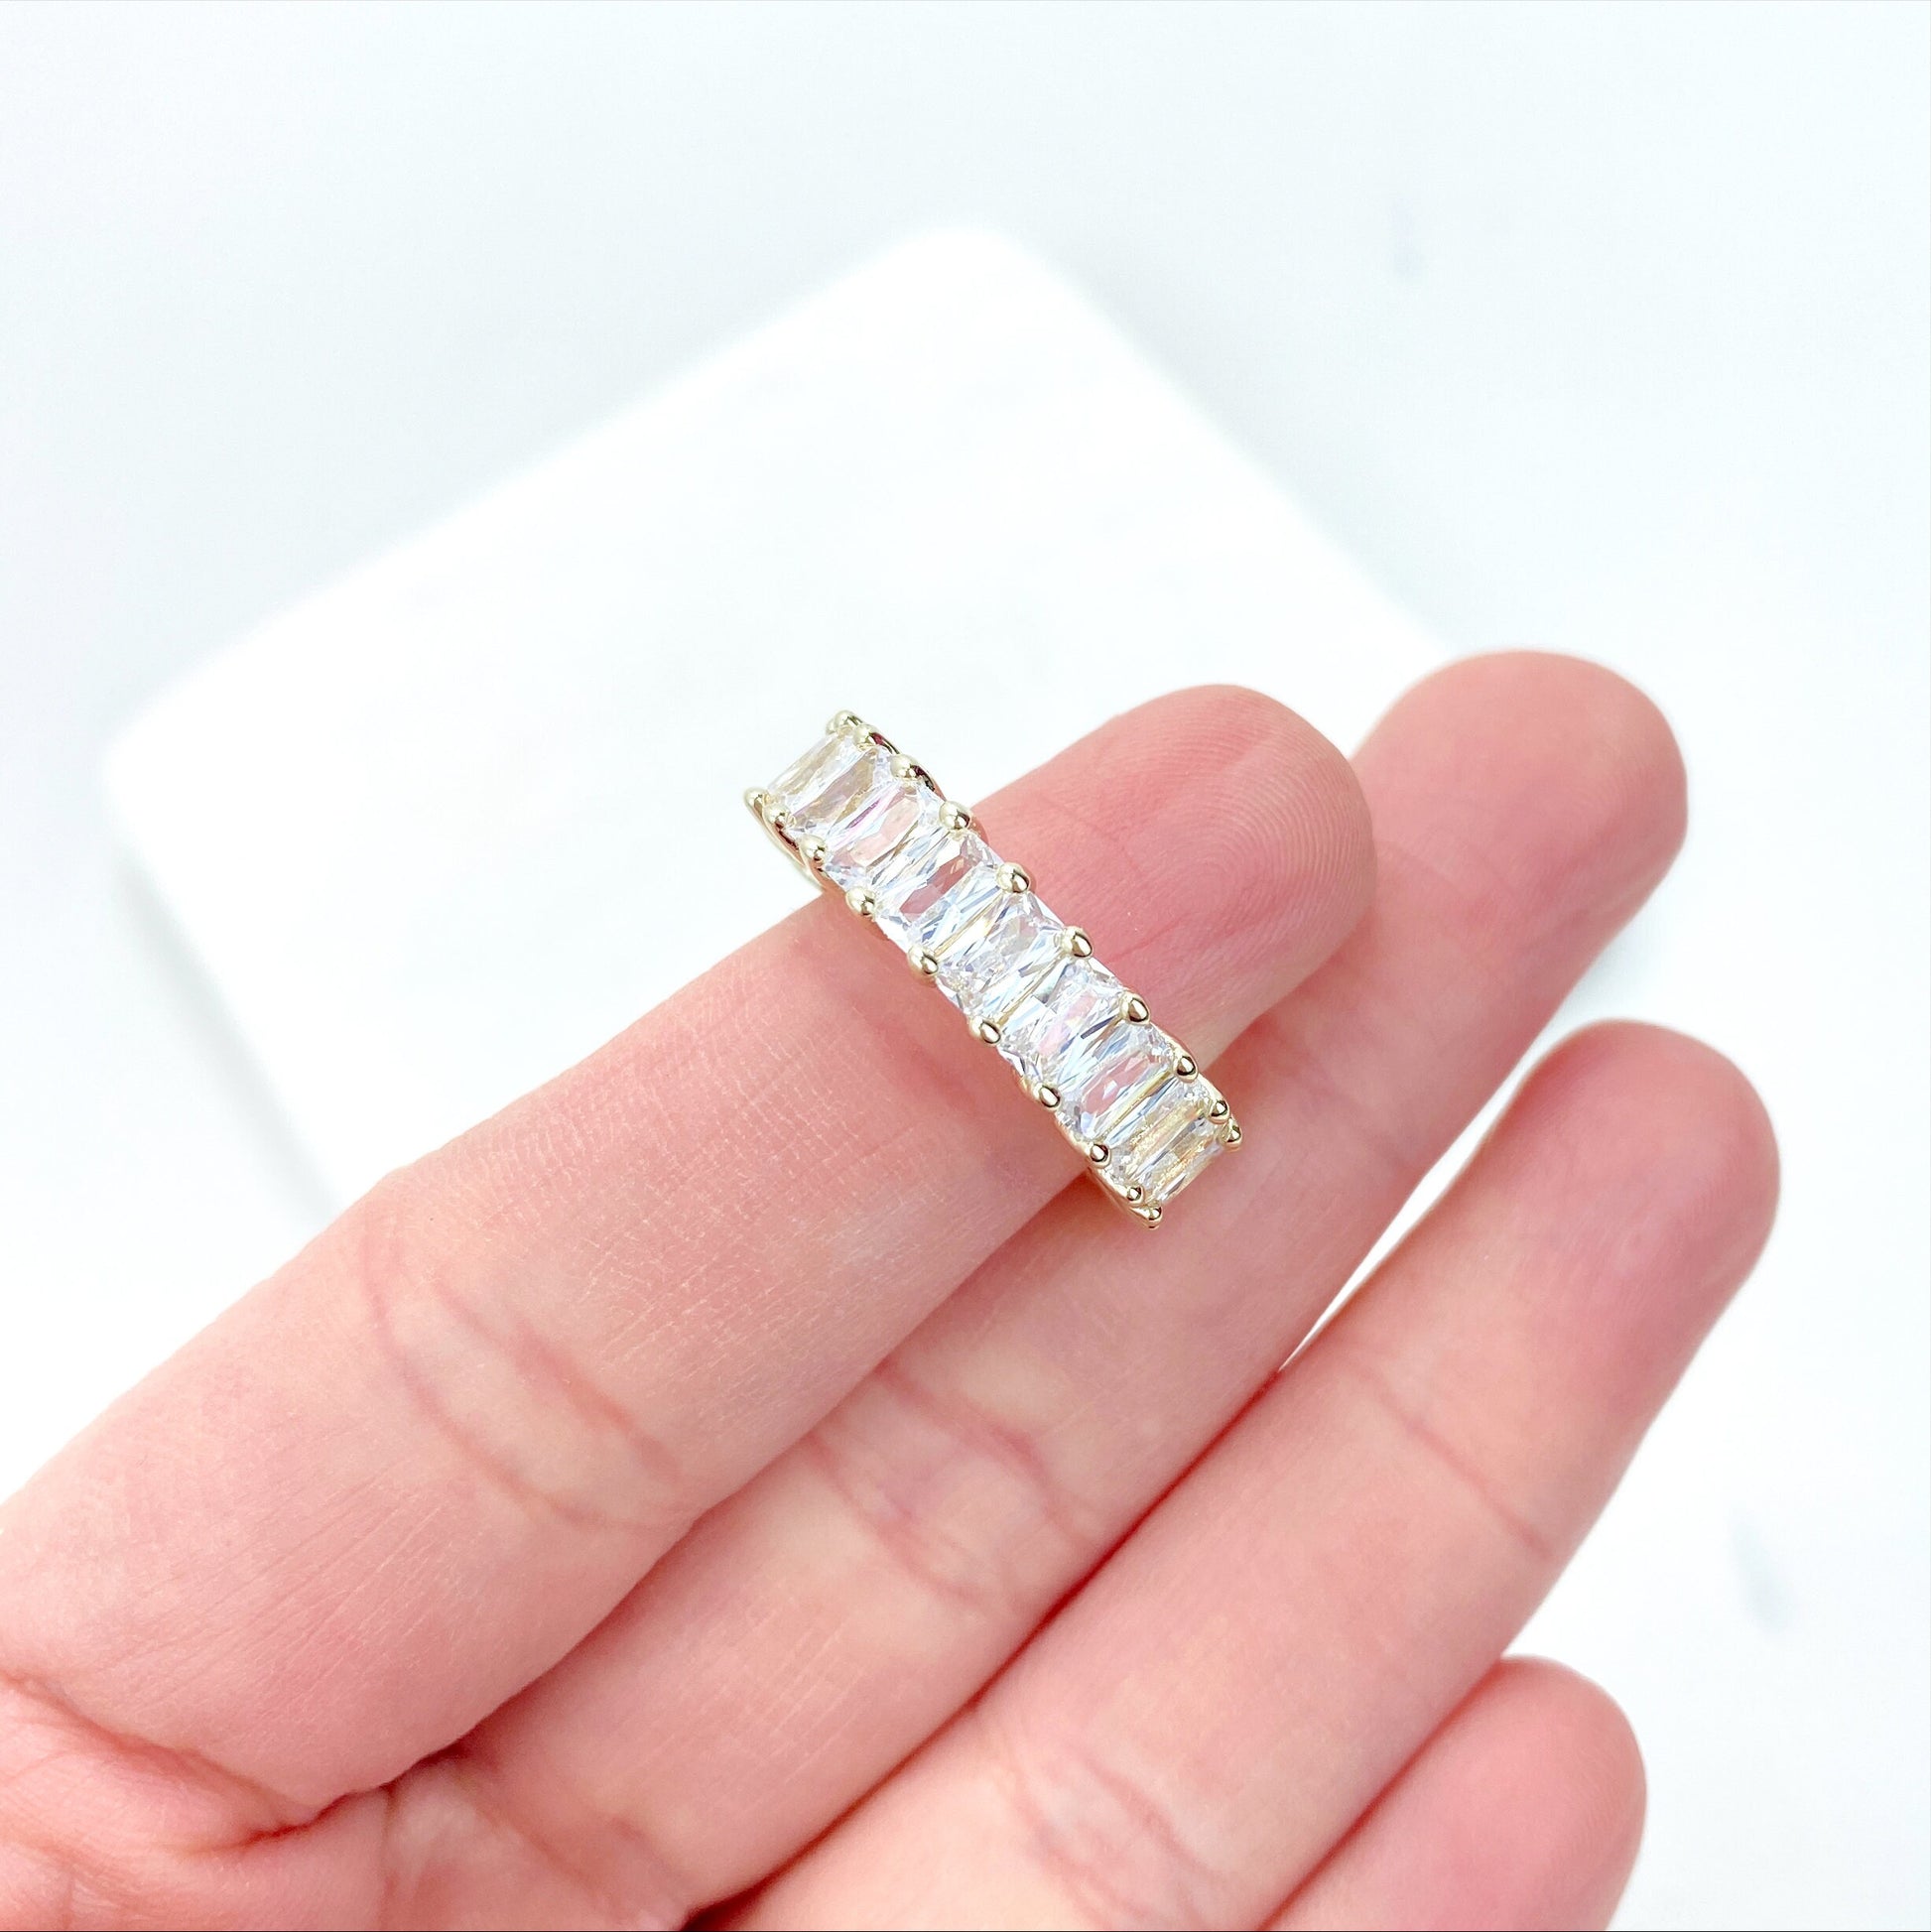 18k Gold Filled Cubic Zirconia Ring Featuring Baguette Settings Wholesale Jewelry Making Supplies